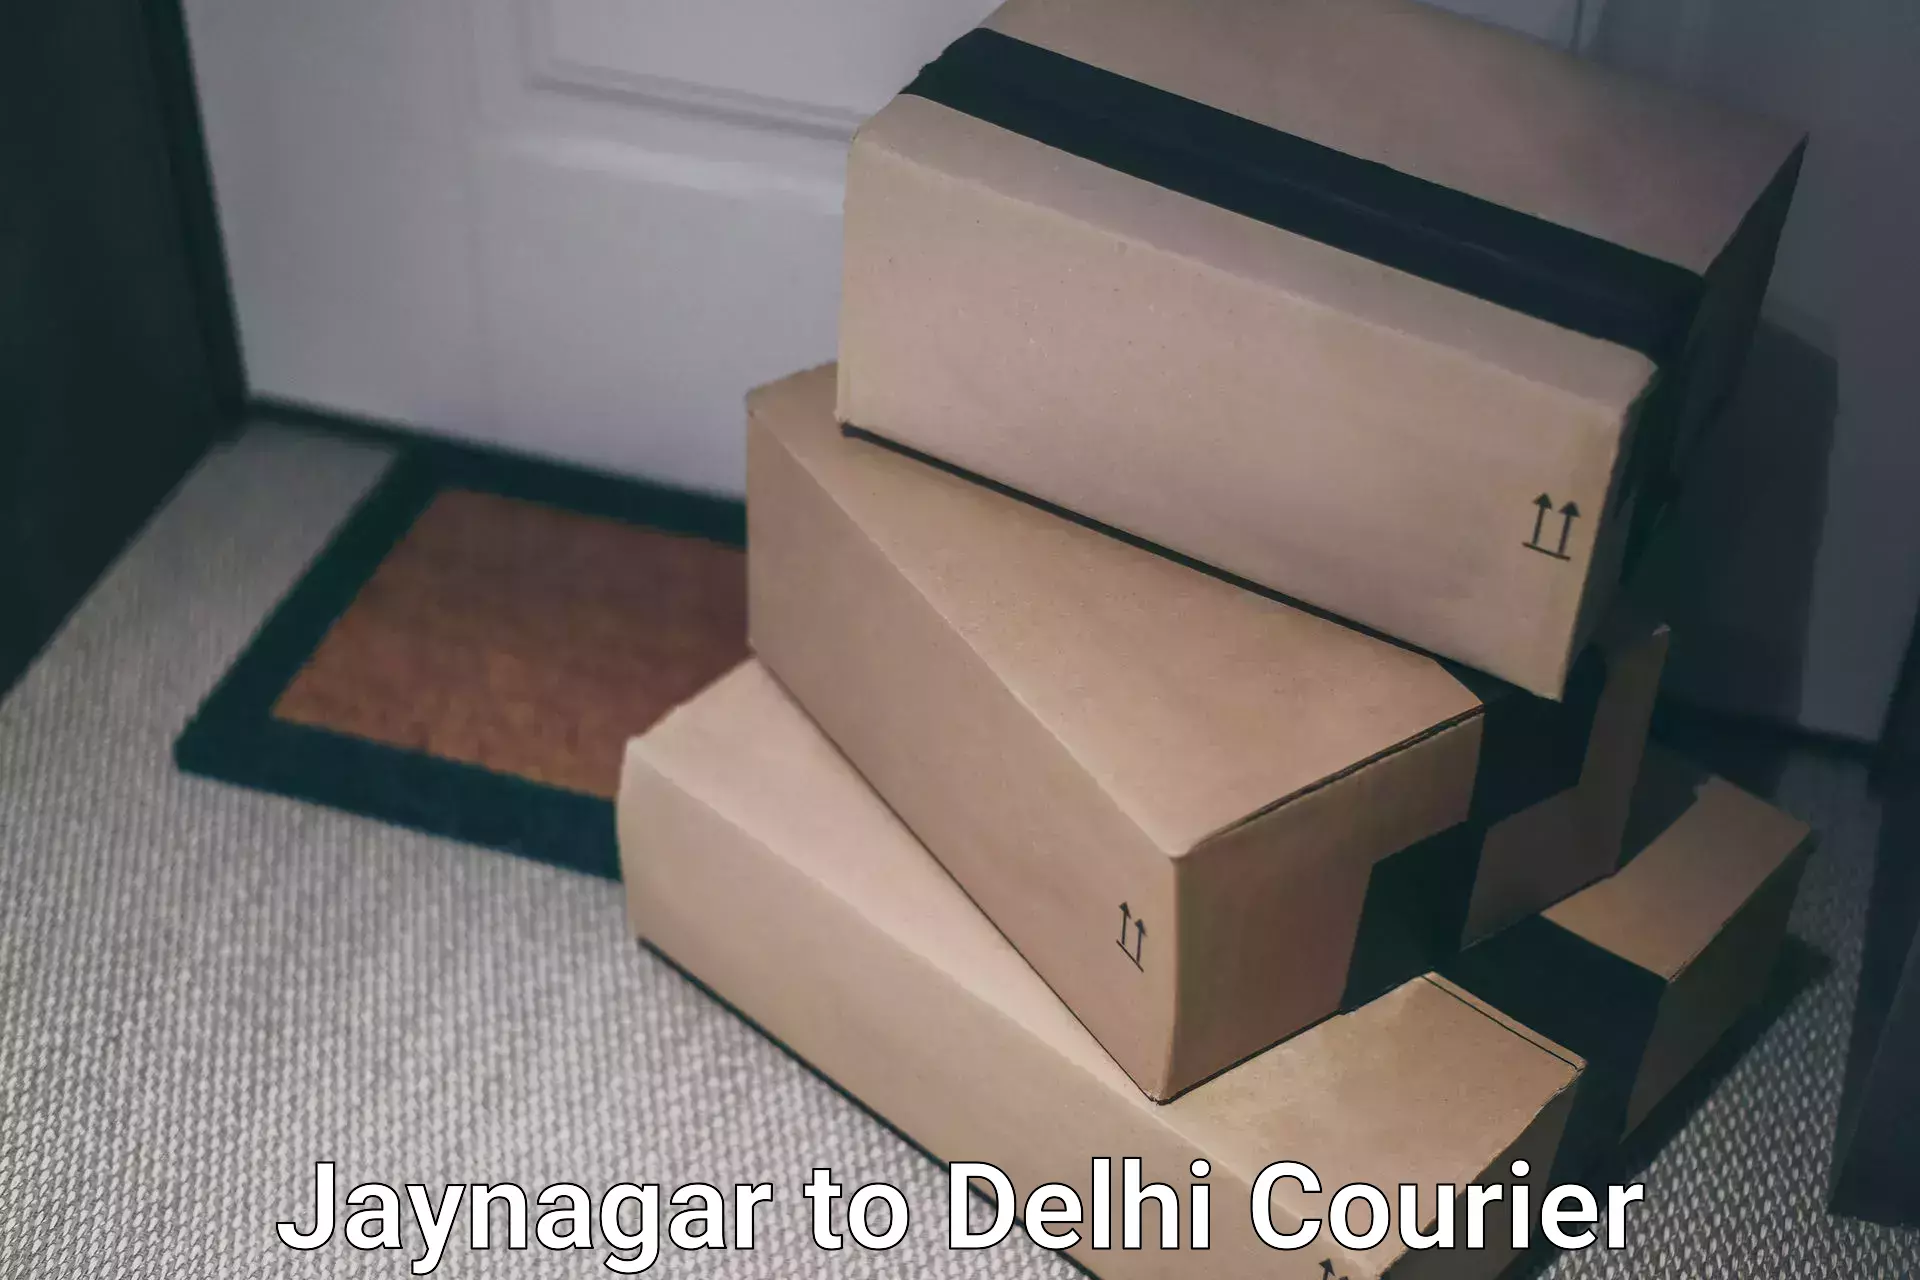 24-hour delivery options Jaynagar to NCR